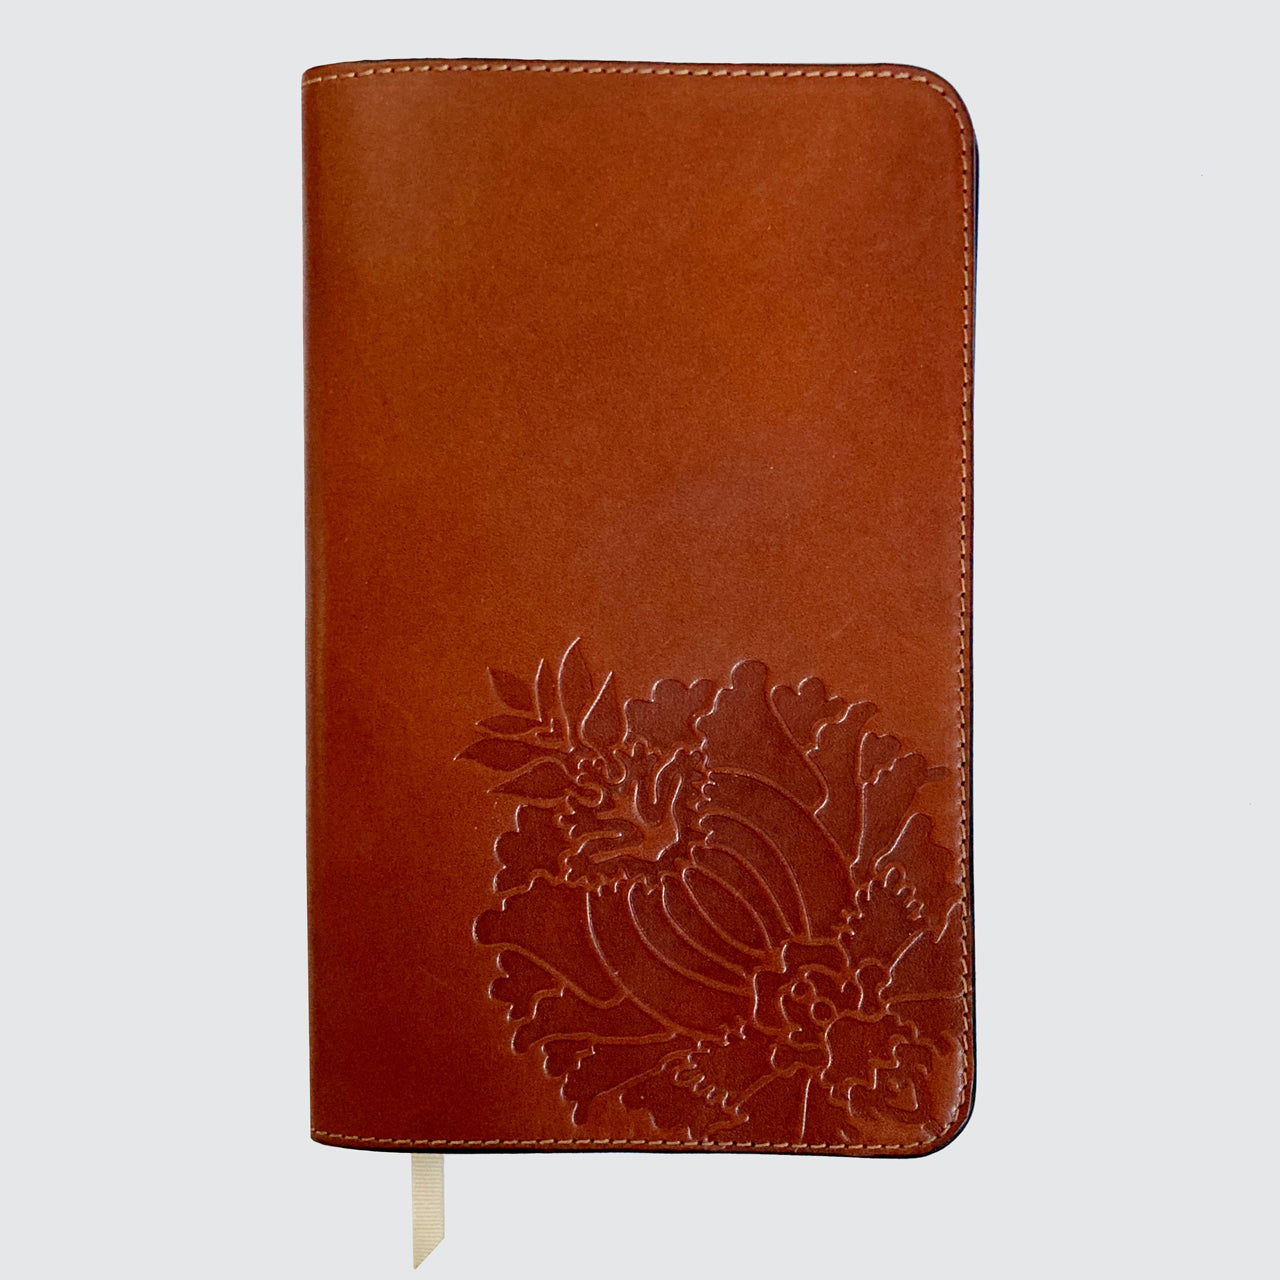 Leather Notebook Cover - Large Cahier